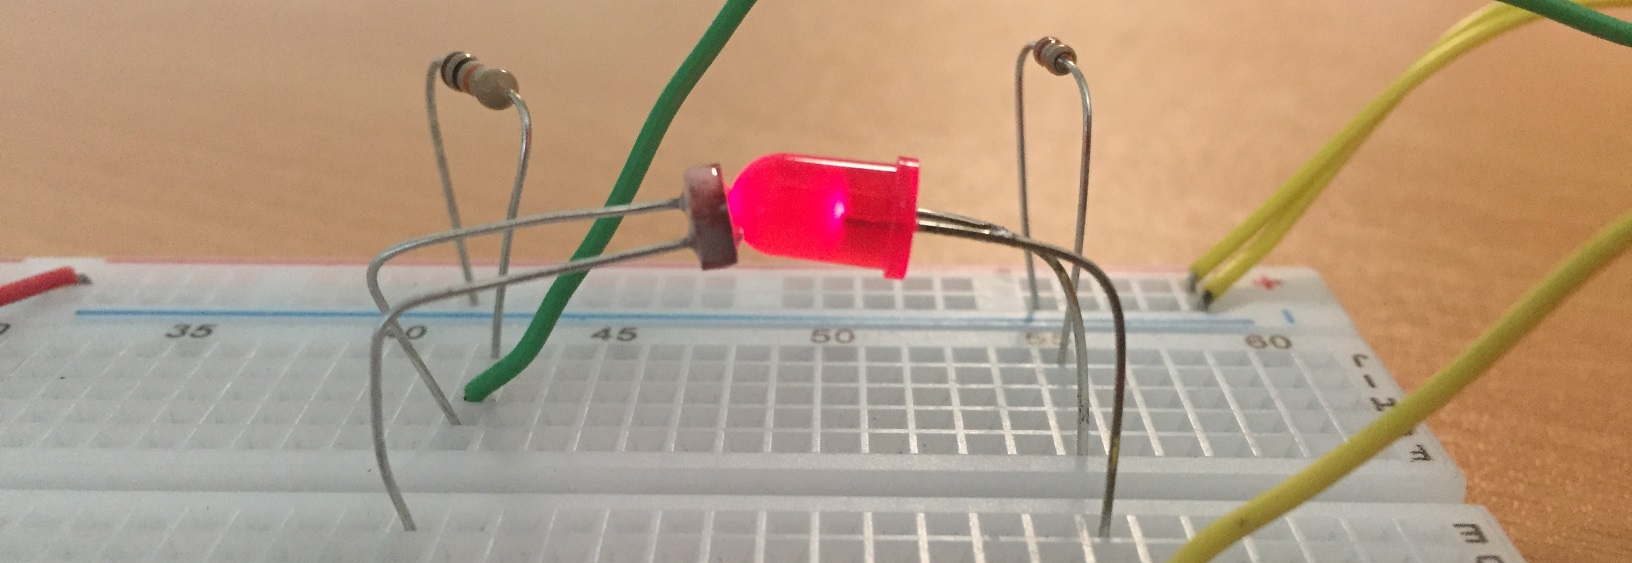 Fig. 3: Position the LED and LDR next to each other so that the LED light will shine upon the LDR.